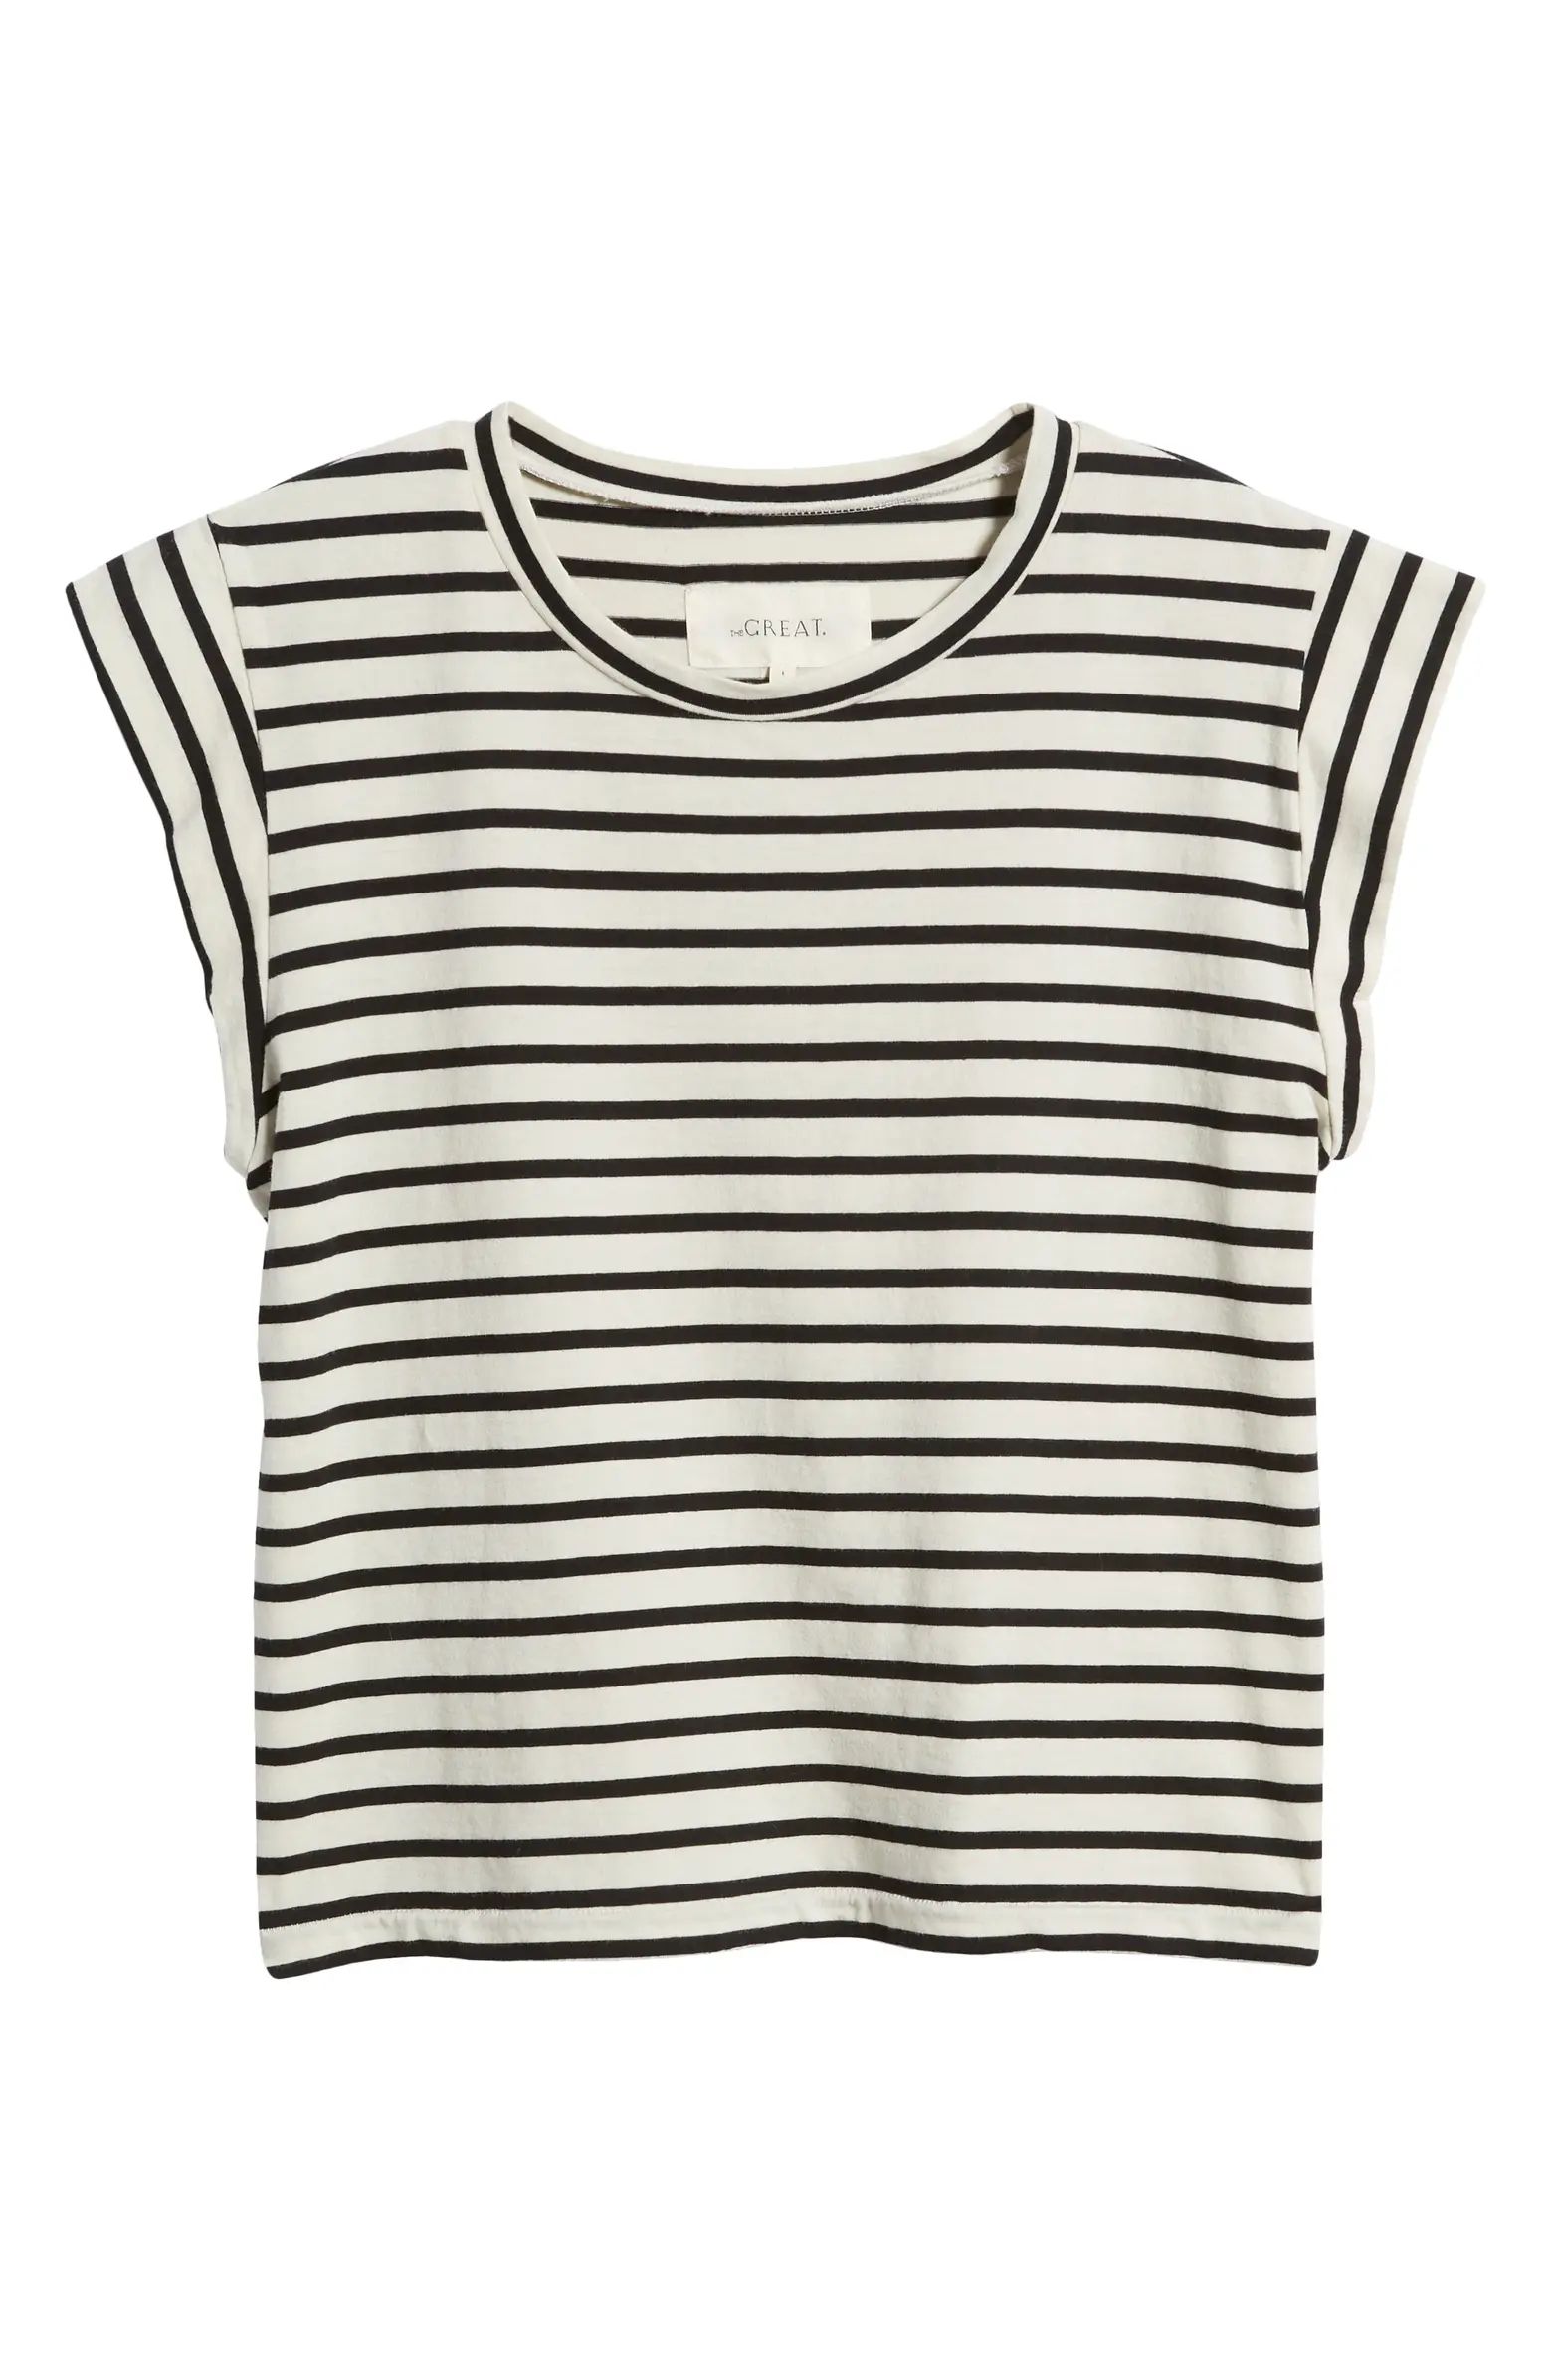 THE GREAT. The Peak Stripe Cotton Top | Nordstrom | Nordstrom